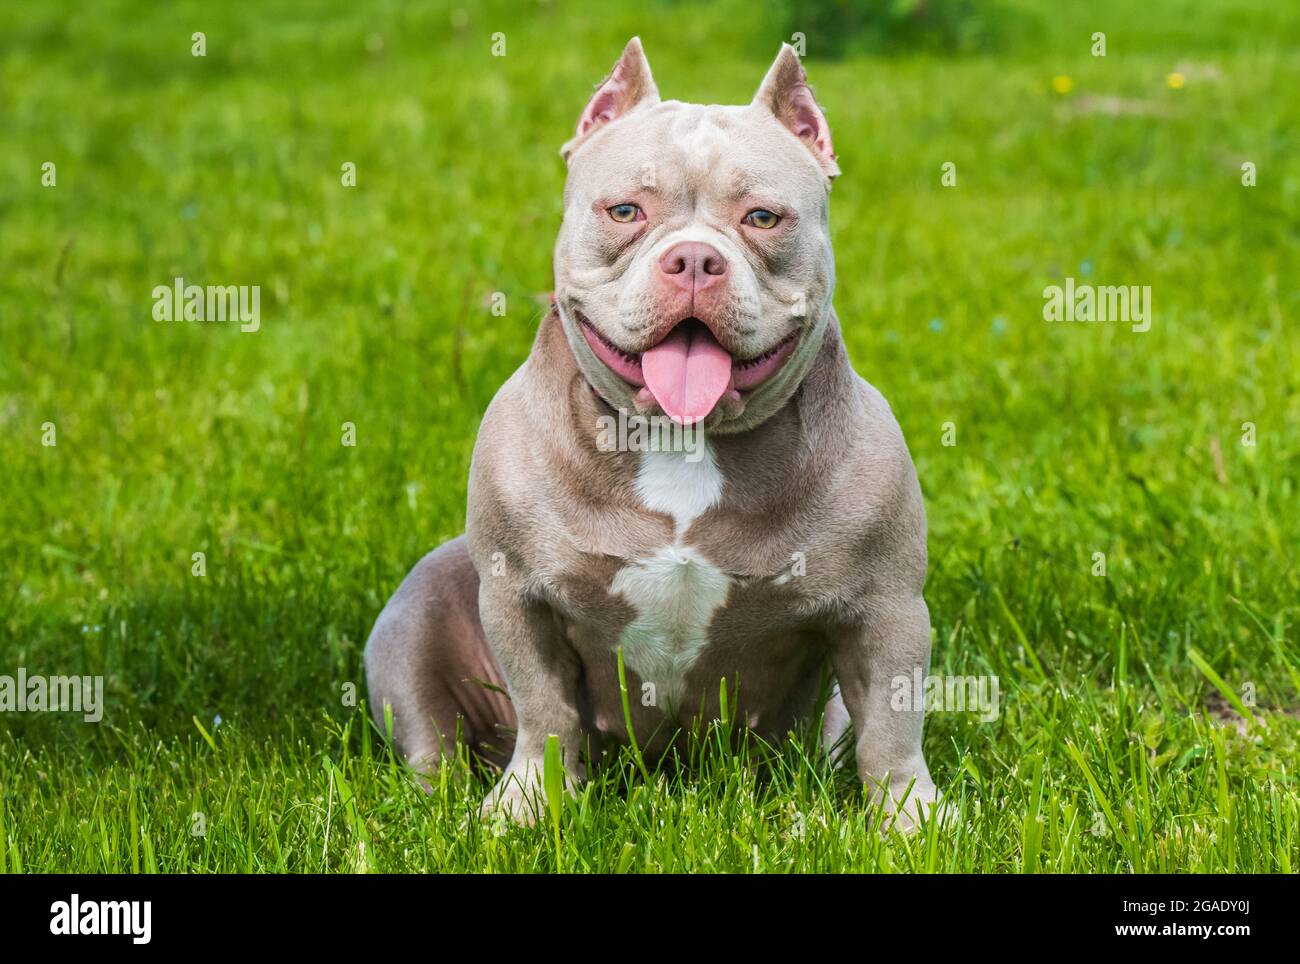 A pocket American Bully puppy dog sitting on green grass Stock Photo - Alamy